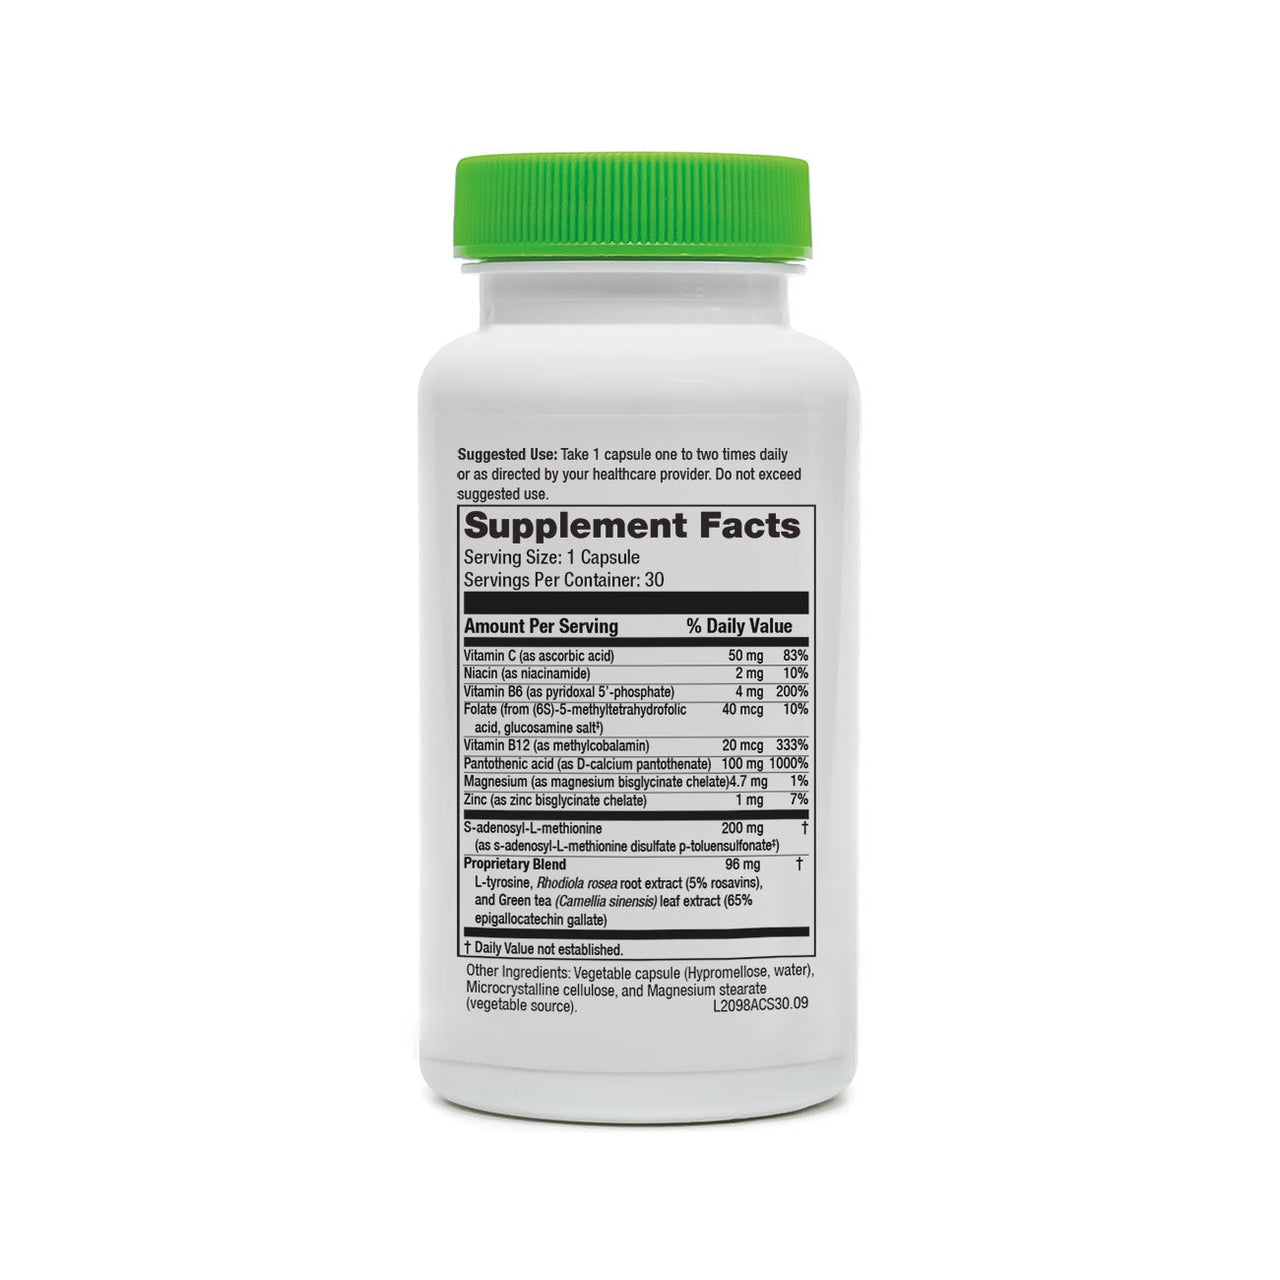 AdreCor with SAMe - Neuroscience Inc - Contains non-glandular ingredients to support adrenal function and mood